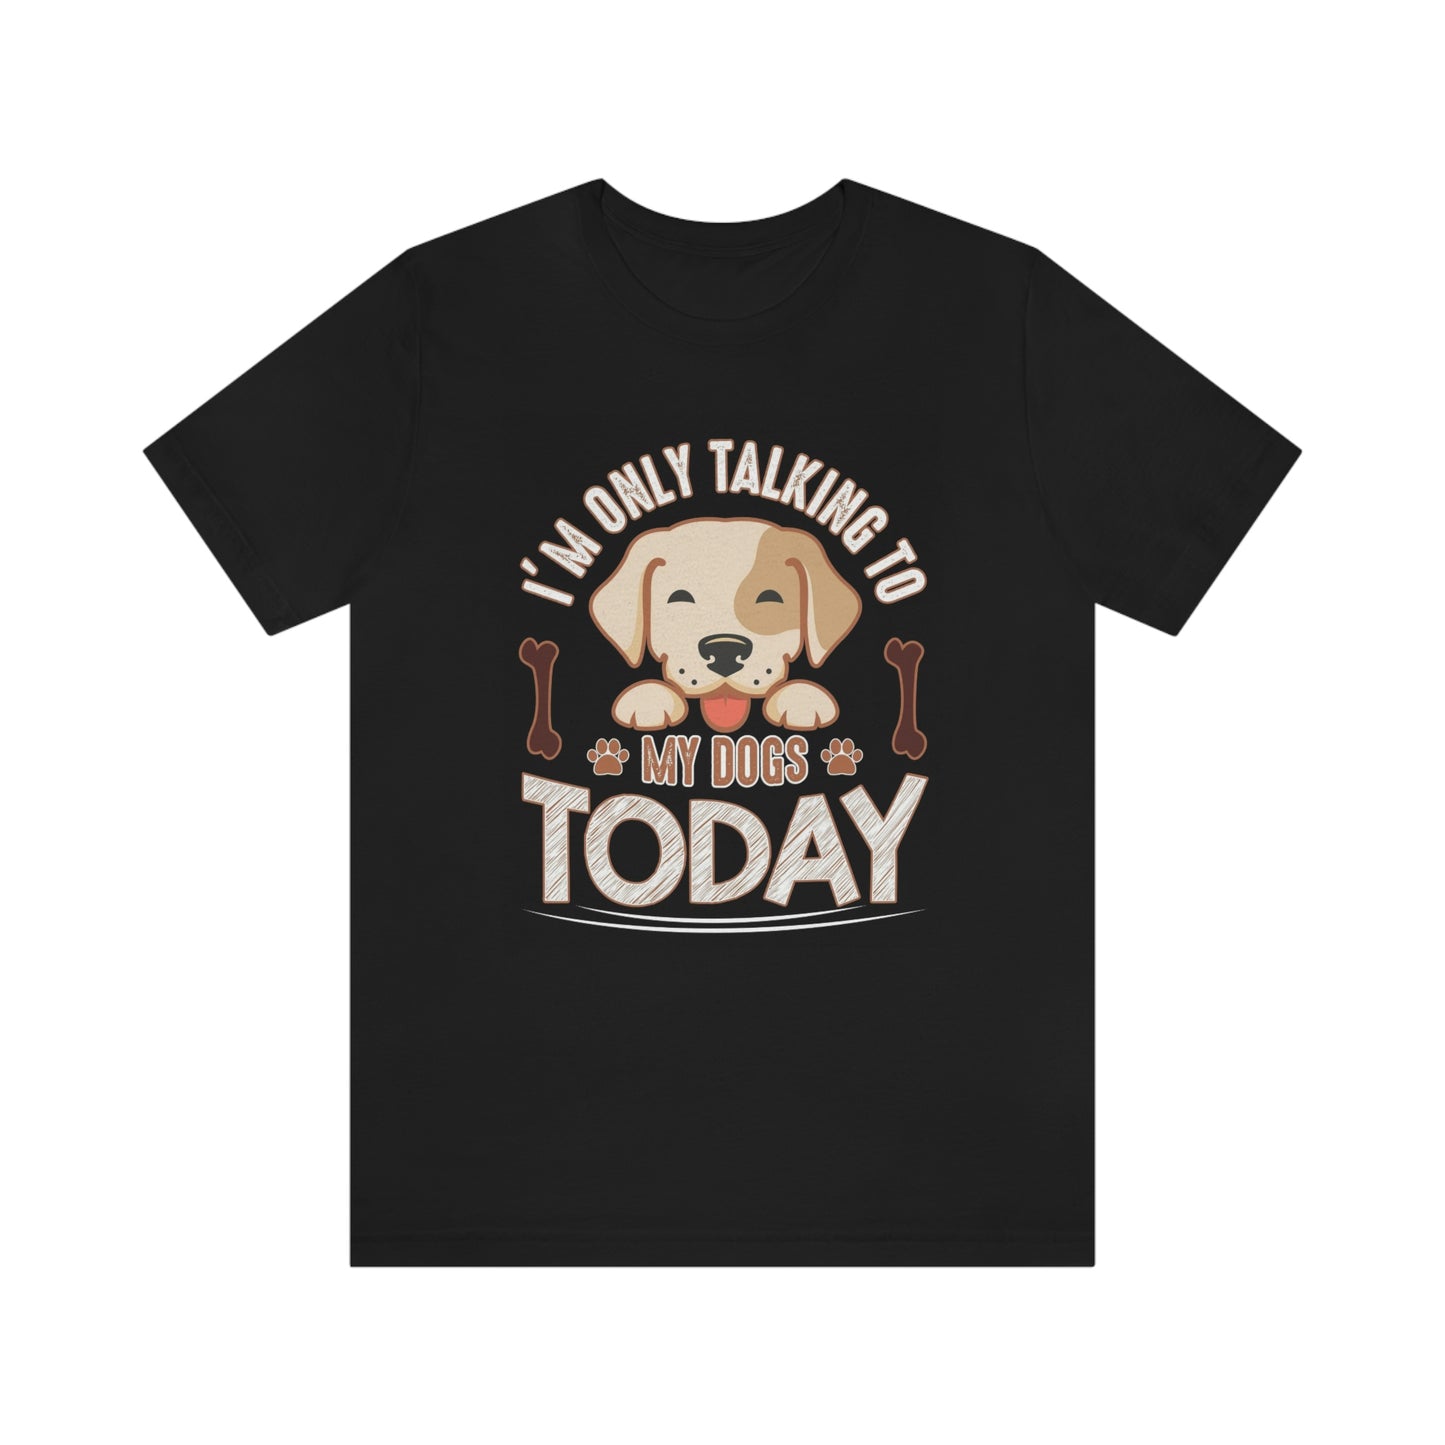 Only talking to dog- Jersey Short Sleeve Tee